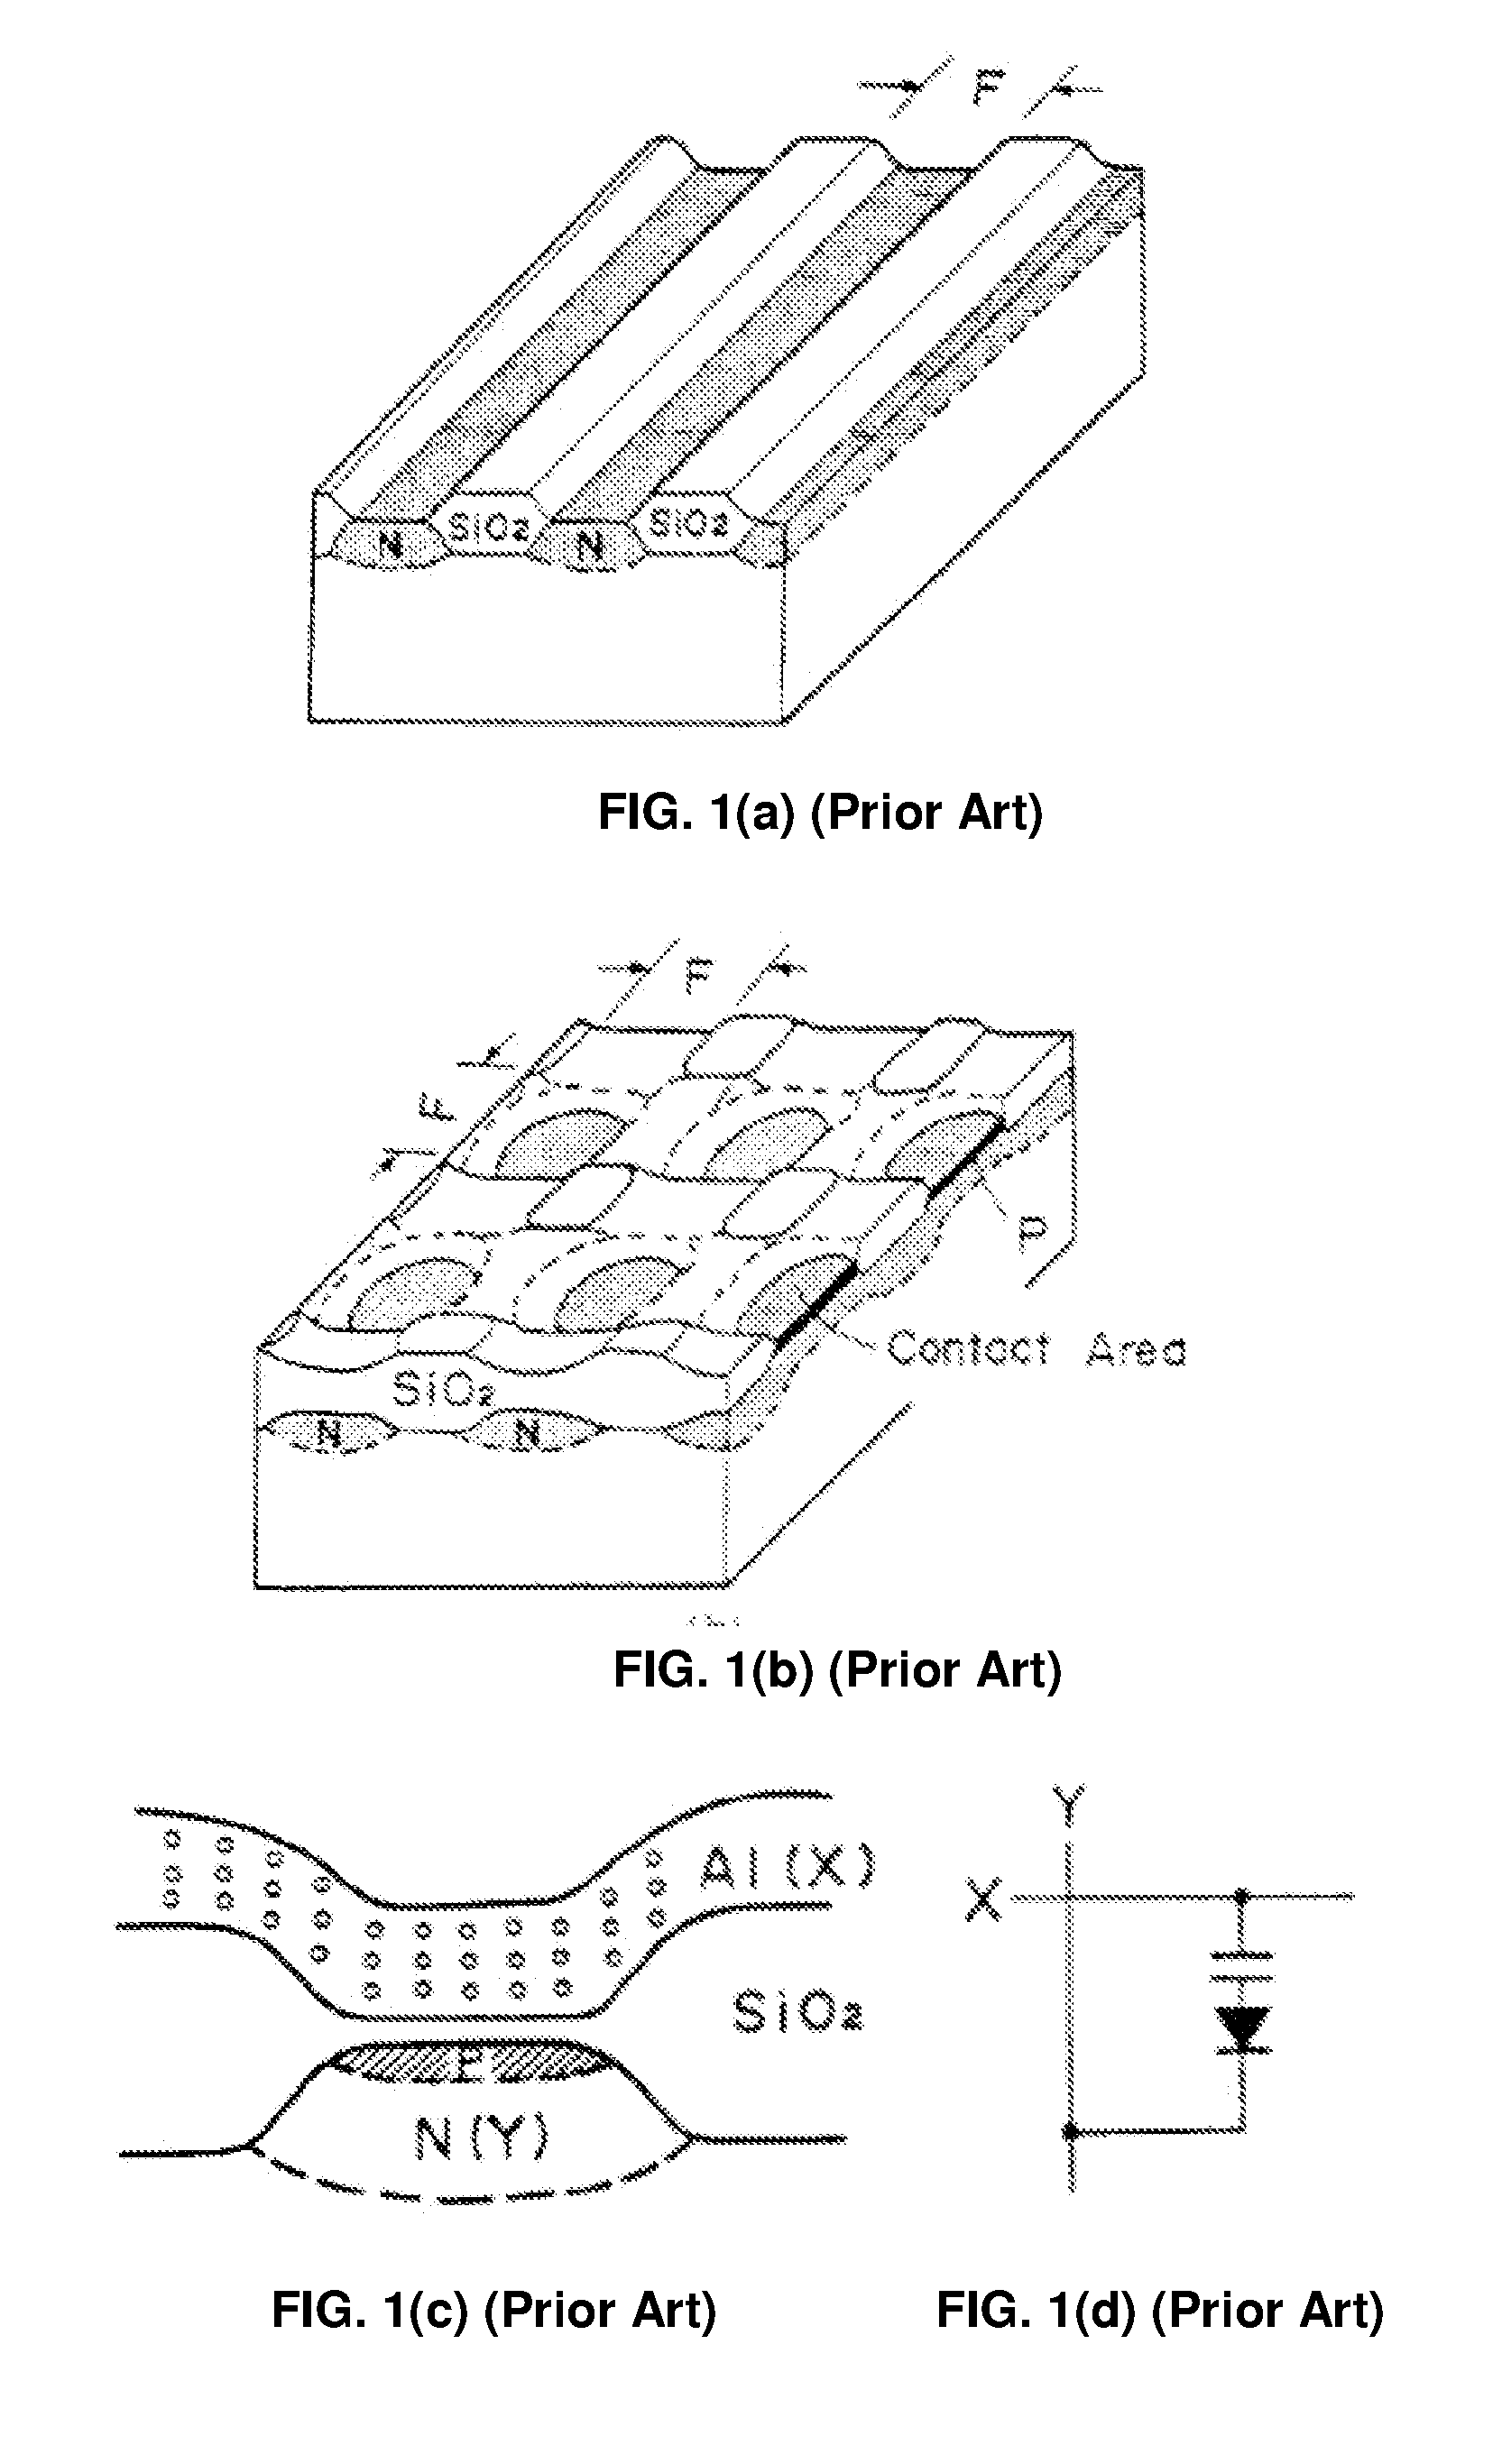 Circuit and system of a high density Anti-fuse